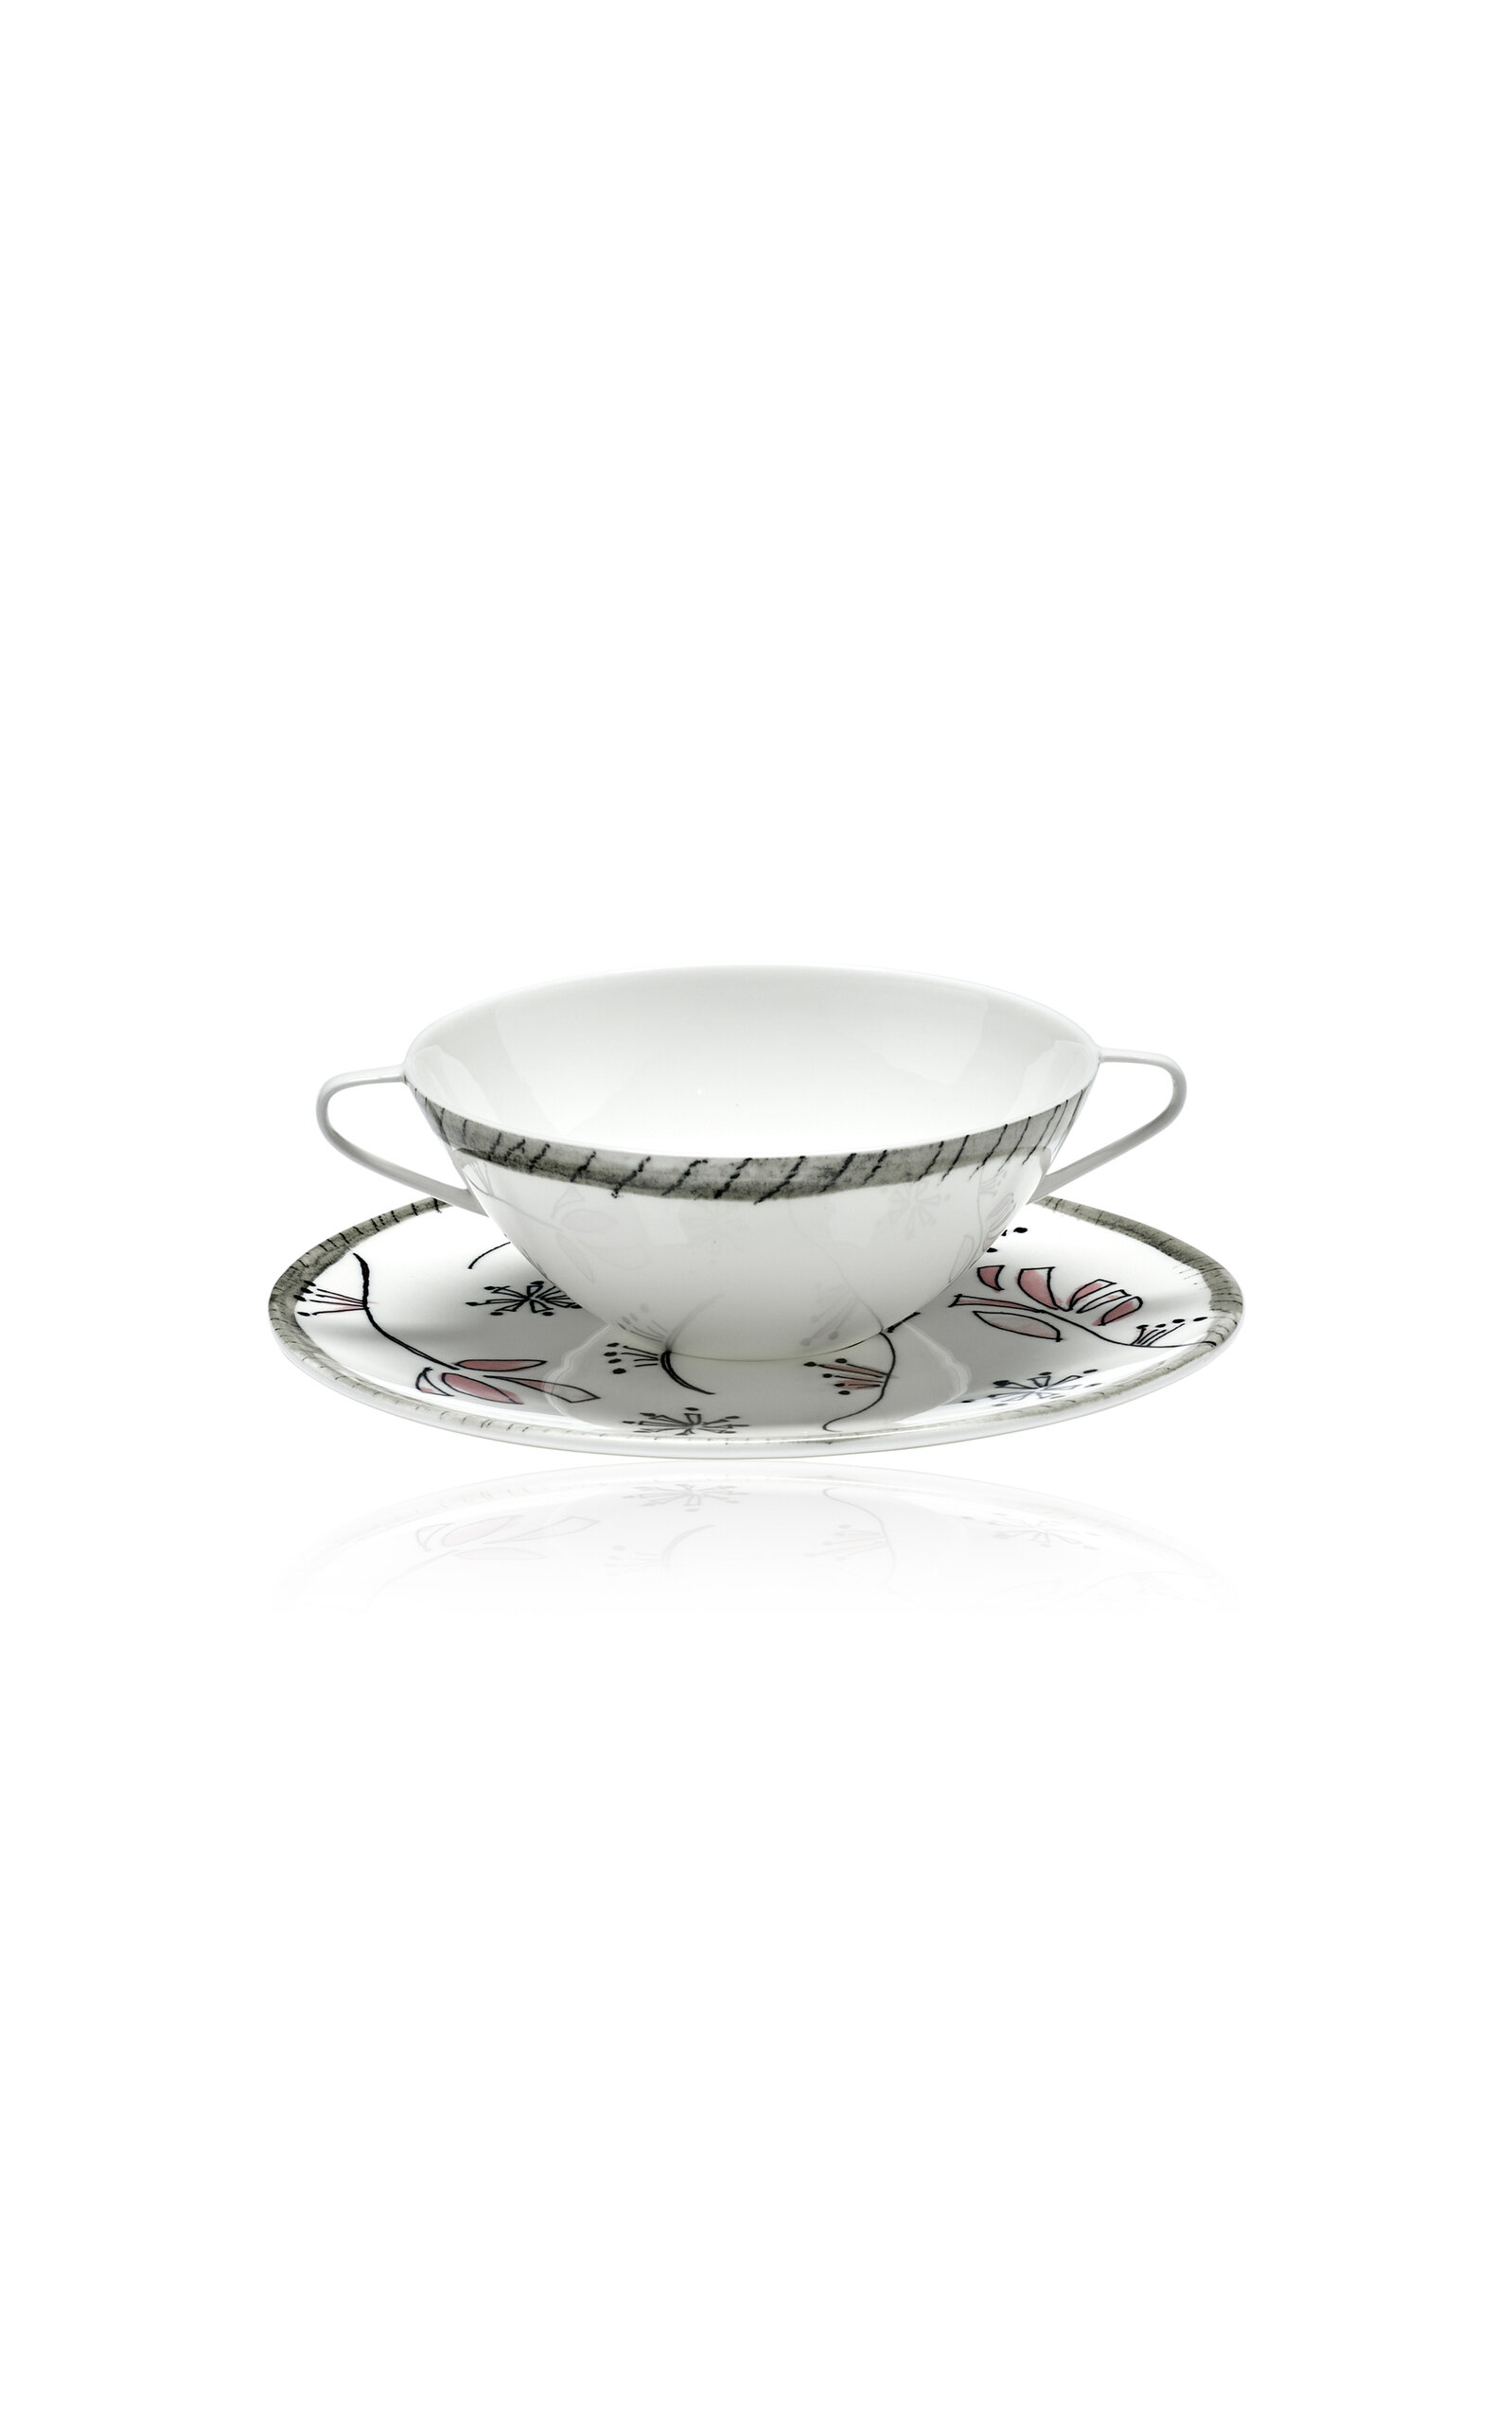 Marni For Serax Serax Marni Midnight Flowers Soup Bowl With Saucer D18cm Fiore Rosa In Multi